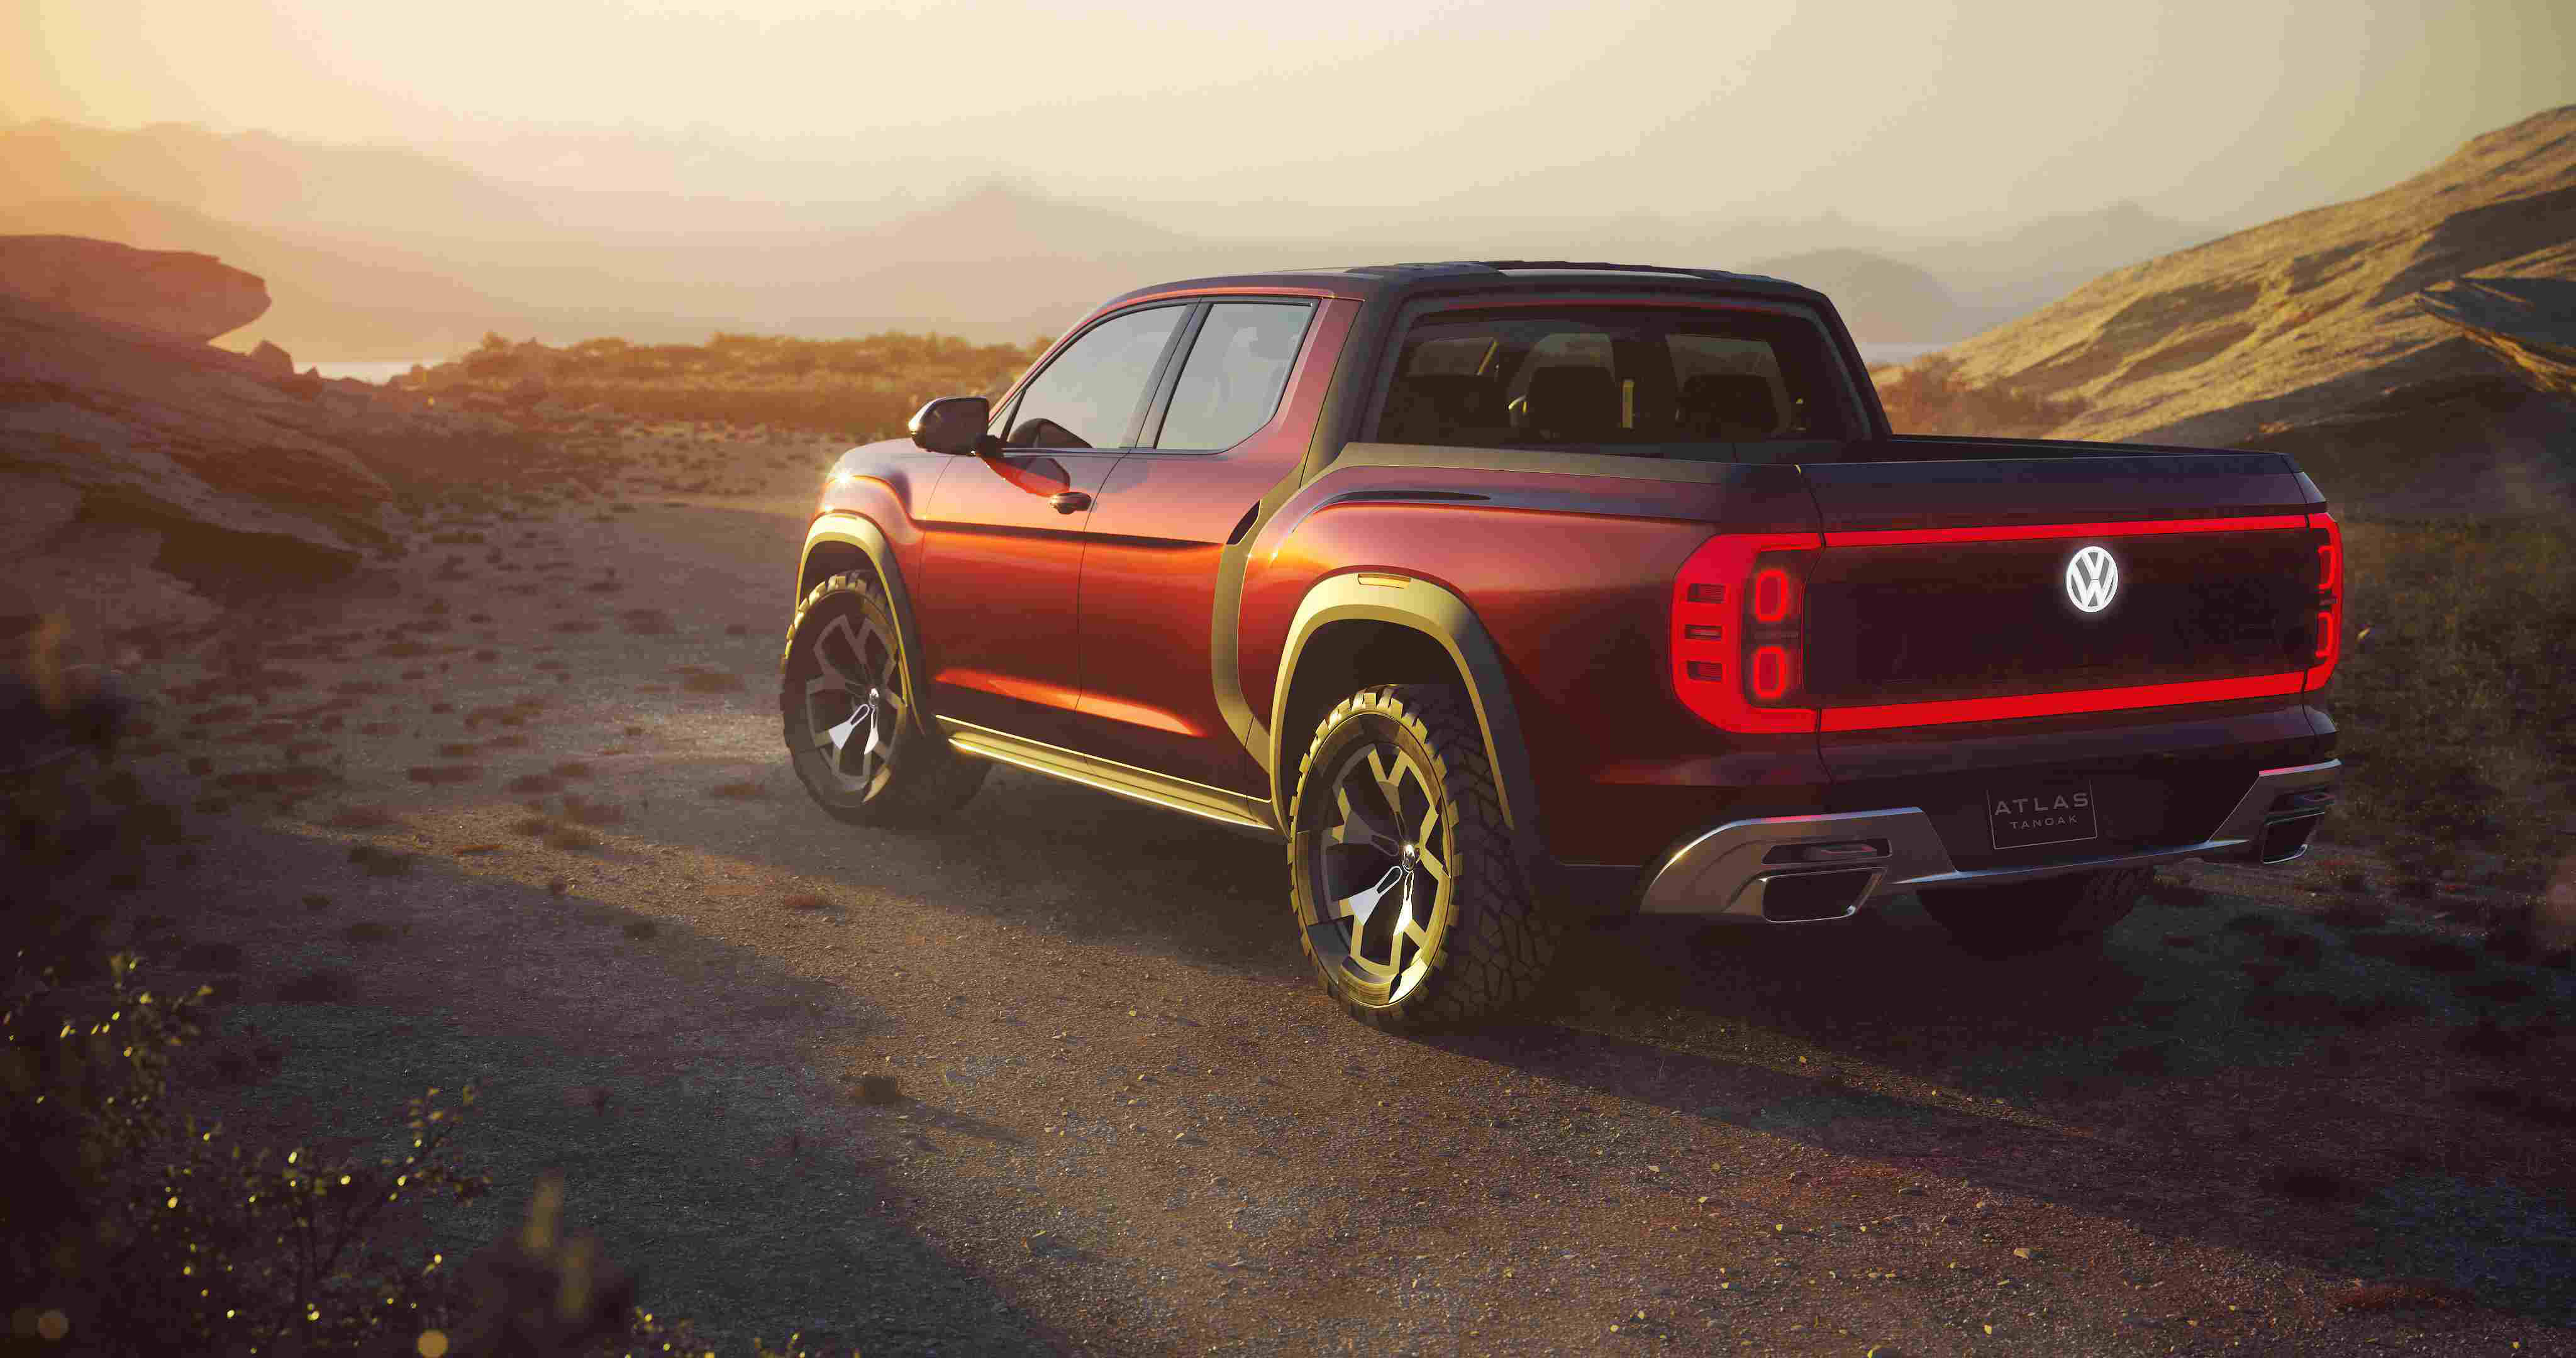 Volkswagen unveils concept pickup & is eager to hear what you think